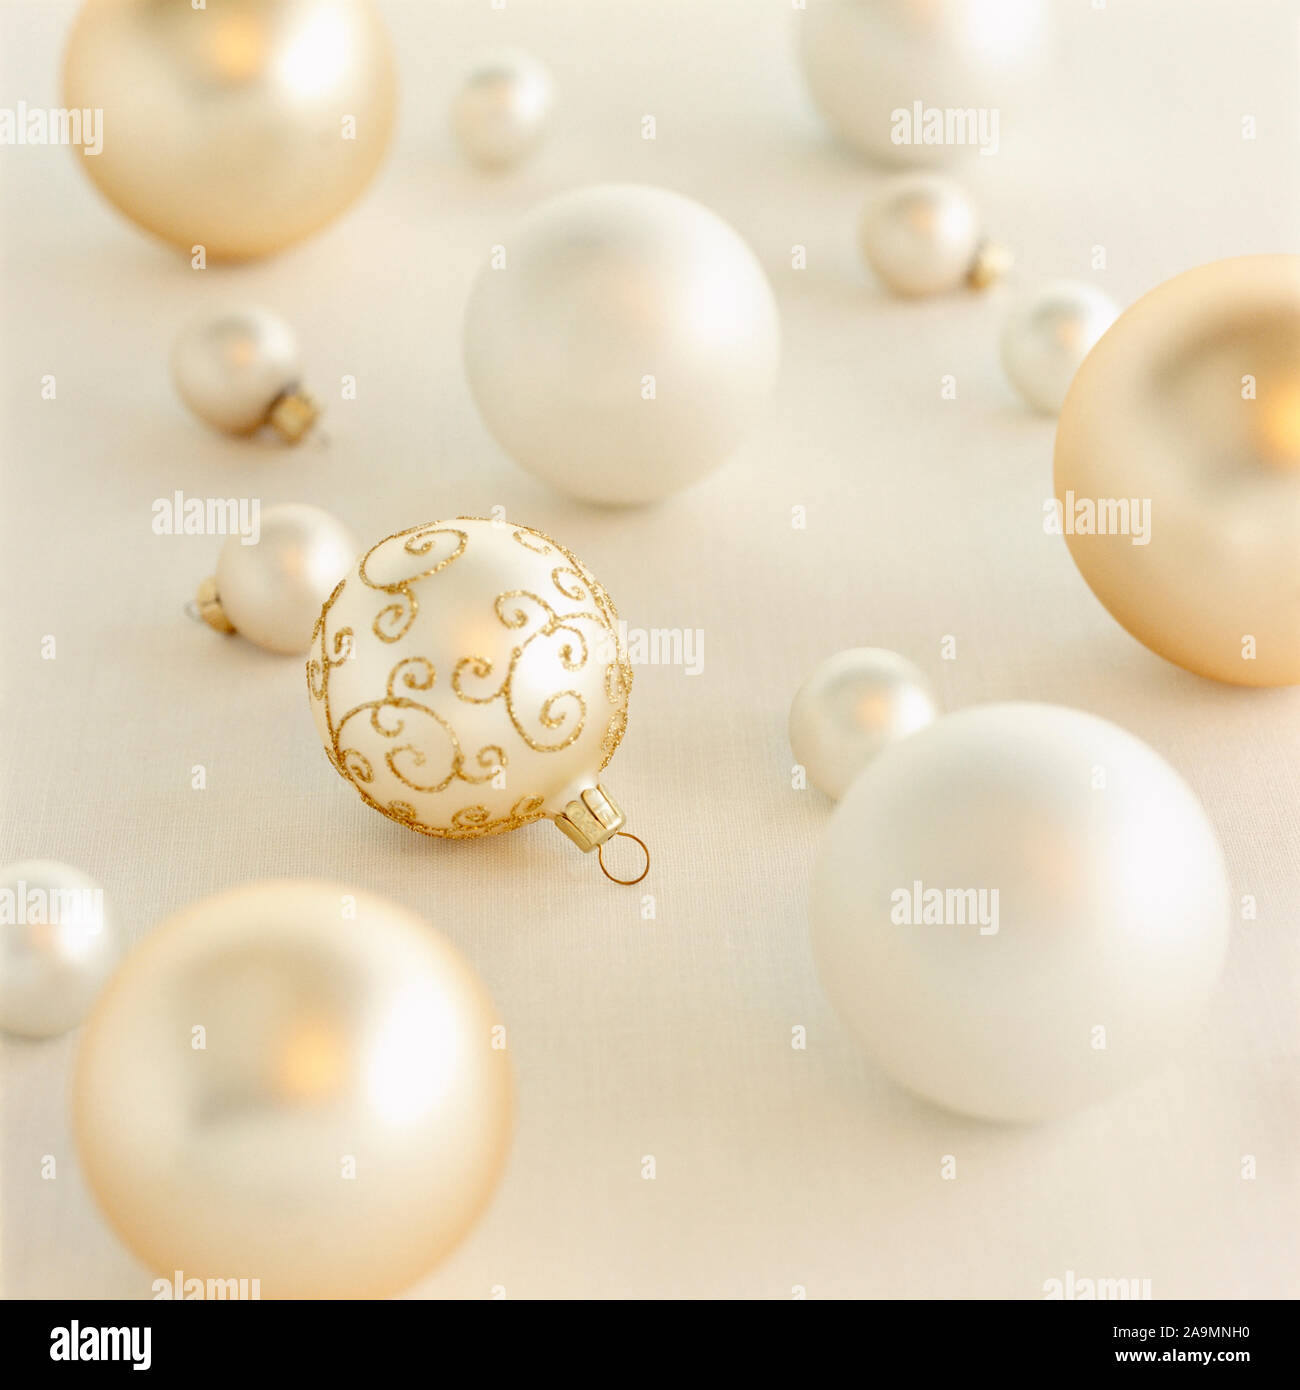 Close-up closeup of beautiful, fancy, elegant, silver, white and gold Christmas ornaments on white background. Luxury holiday decorations backgrounds. Stock Photo